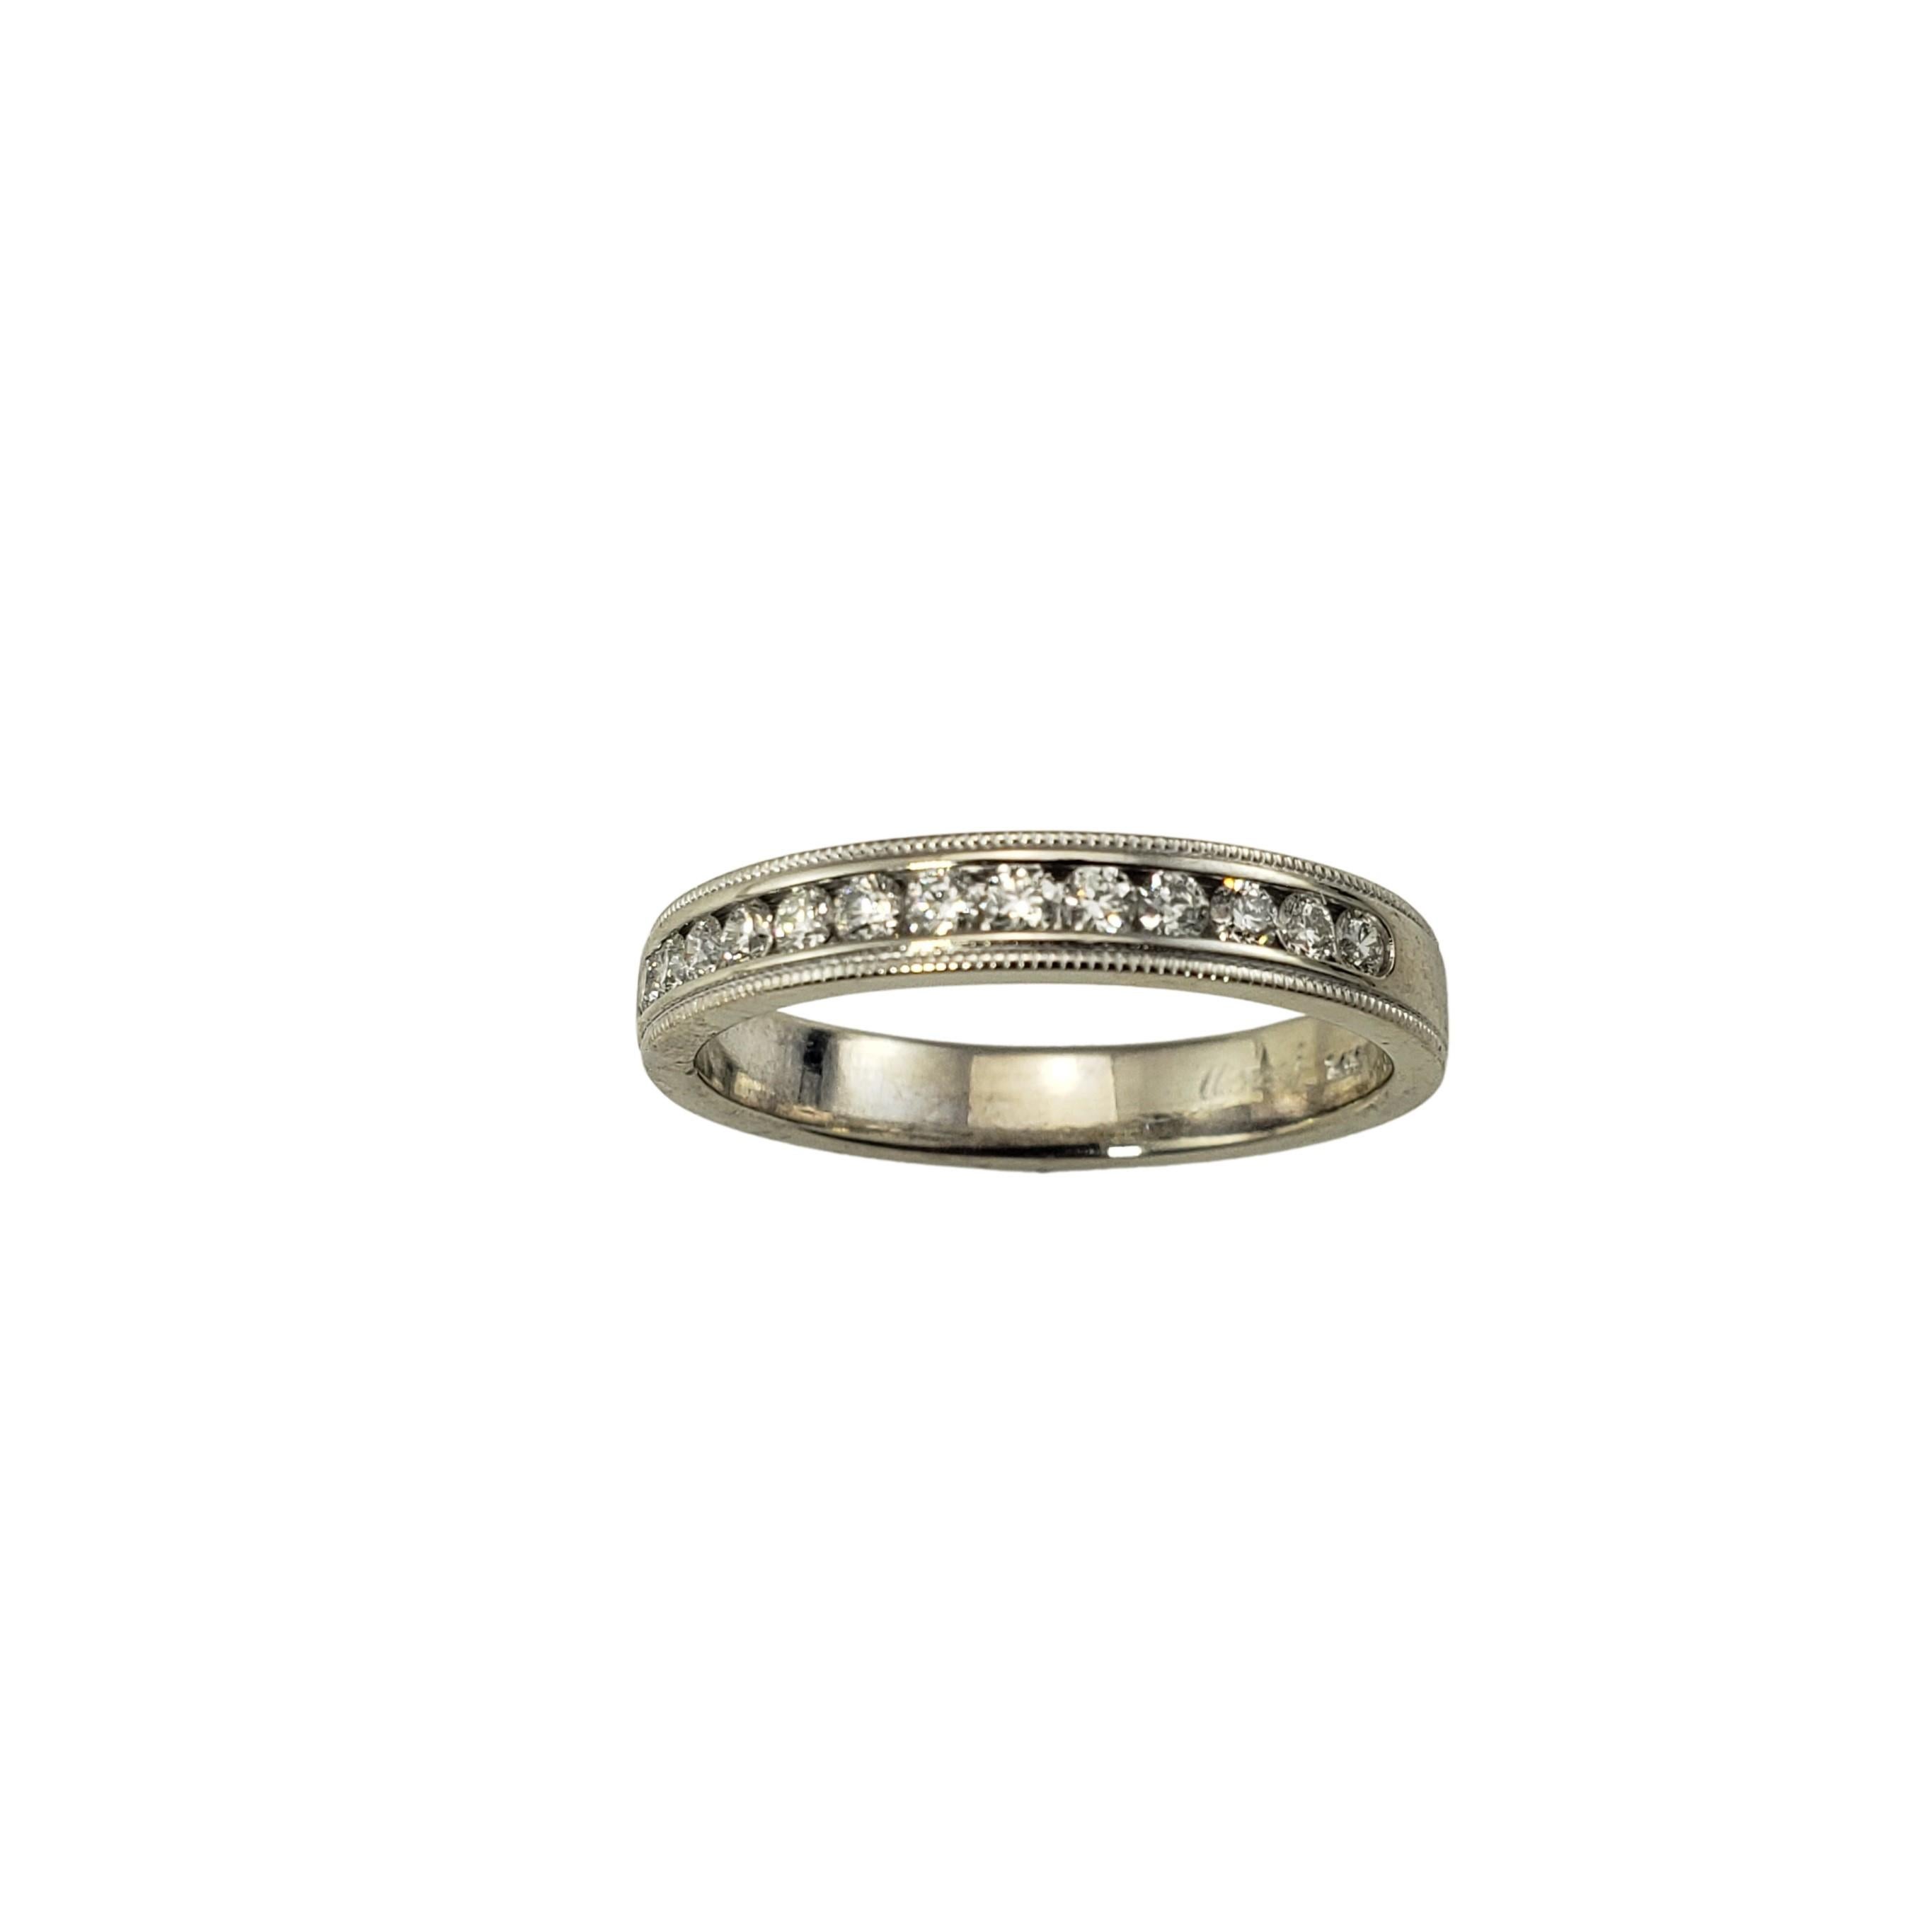 Vintage 14 Karat White Gold and Diamond Wedding Band Ring Size 7-

This sparkling band features 13 round brilliant cut diamonds set in classic 14K white gold.  Finished with an elegant milgrain edge.  Width:  3 mm.

Approximate total diamond weight: